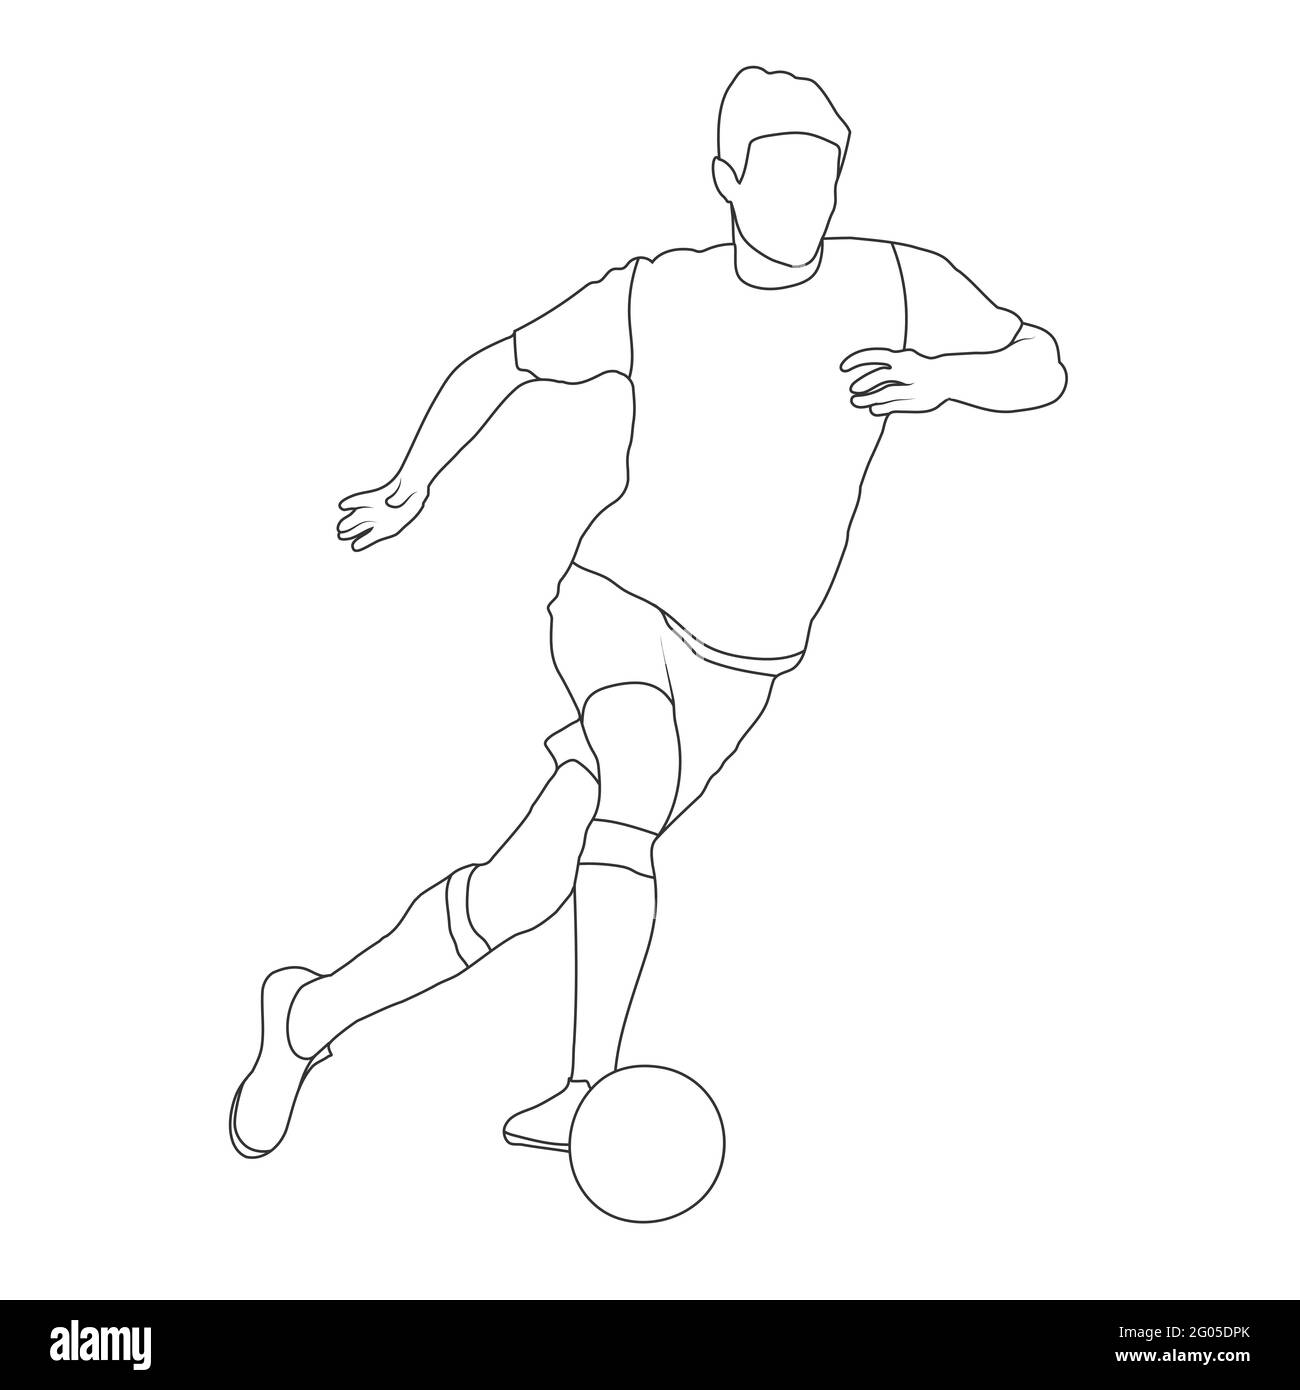 Football. Contoured silhouette of a football player. An athlete plays football. Flat Style Stock Vector